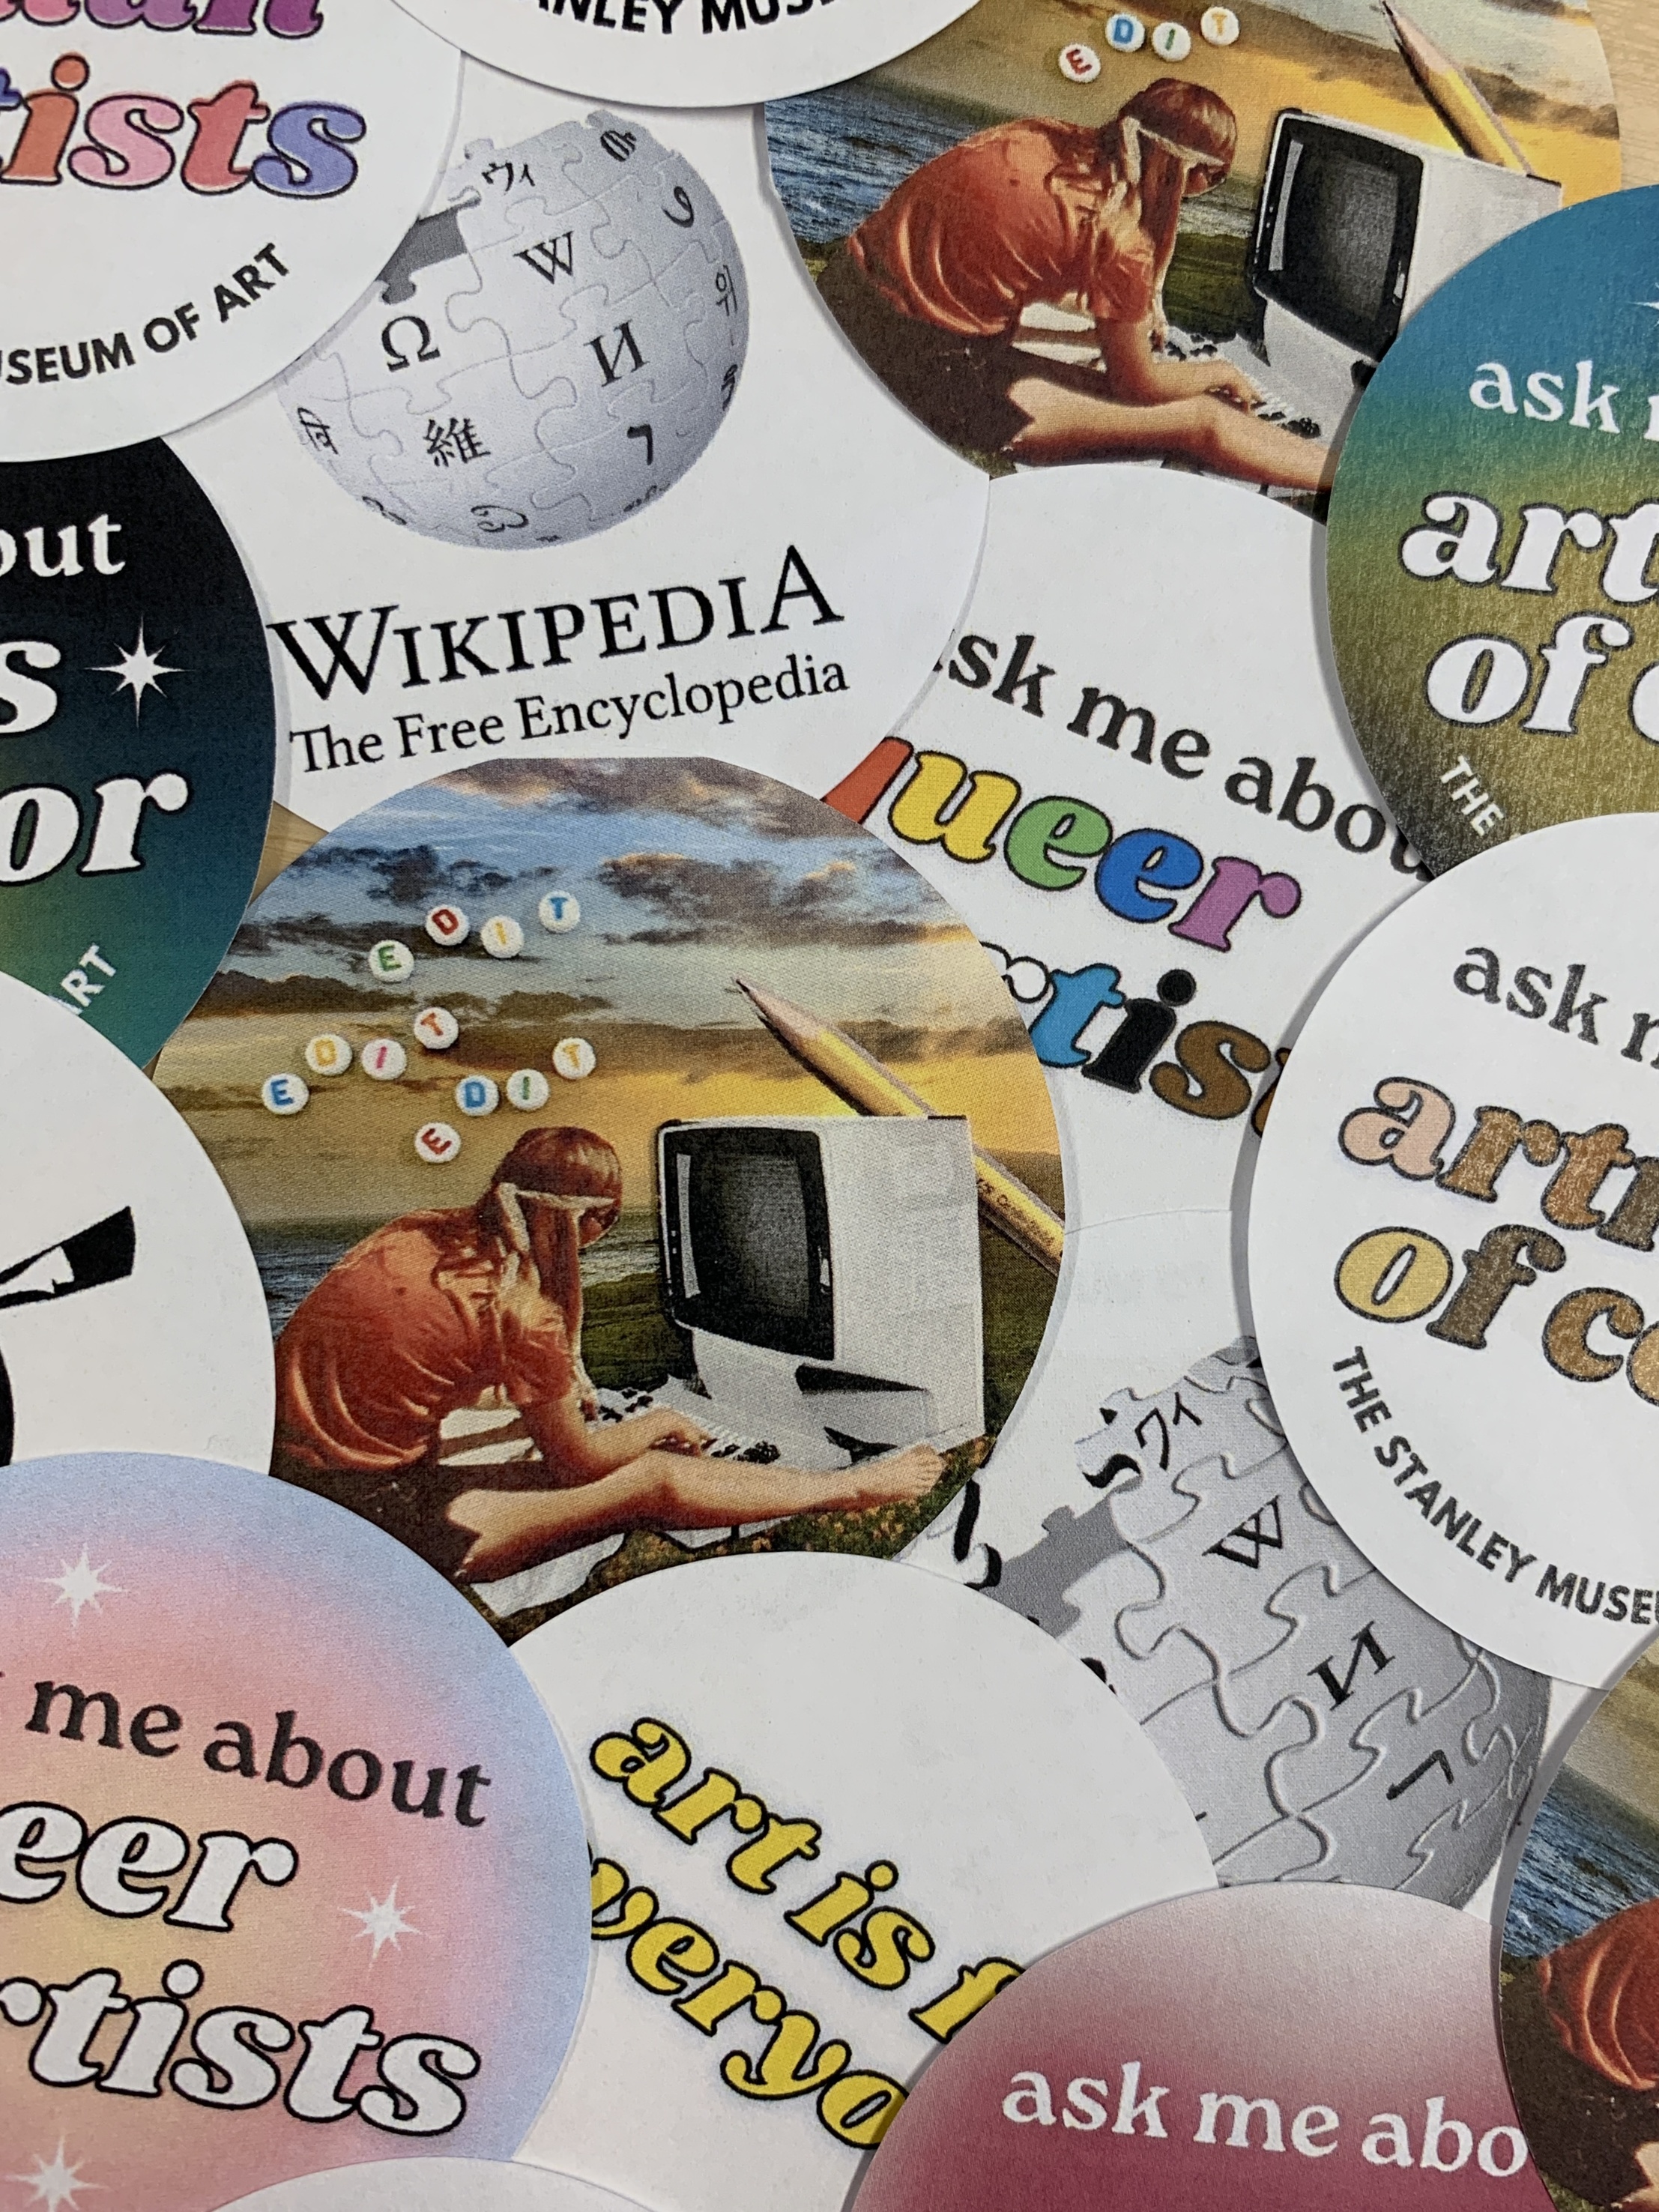 A pile of buttons for the Wikipedia Edit-a-thon with different slogans on them.